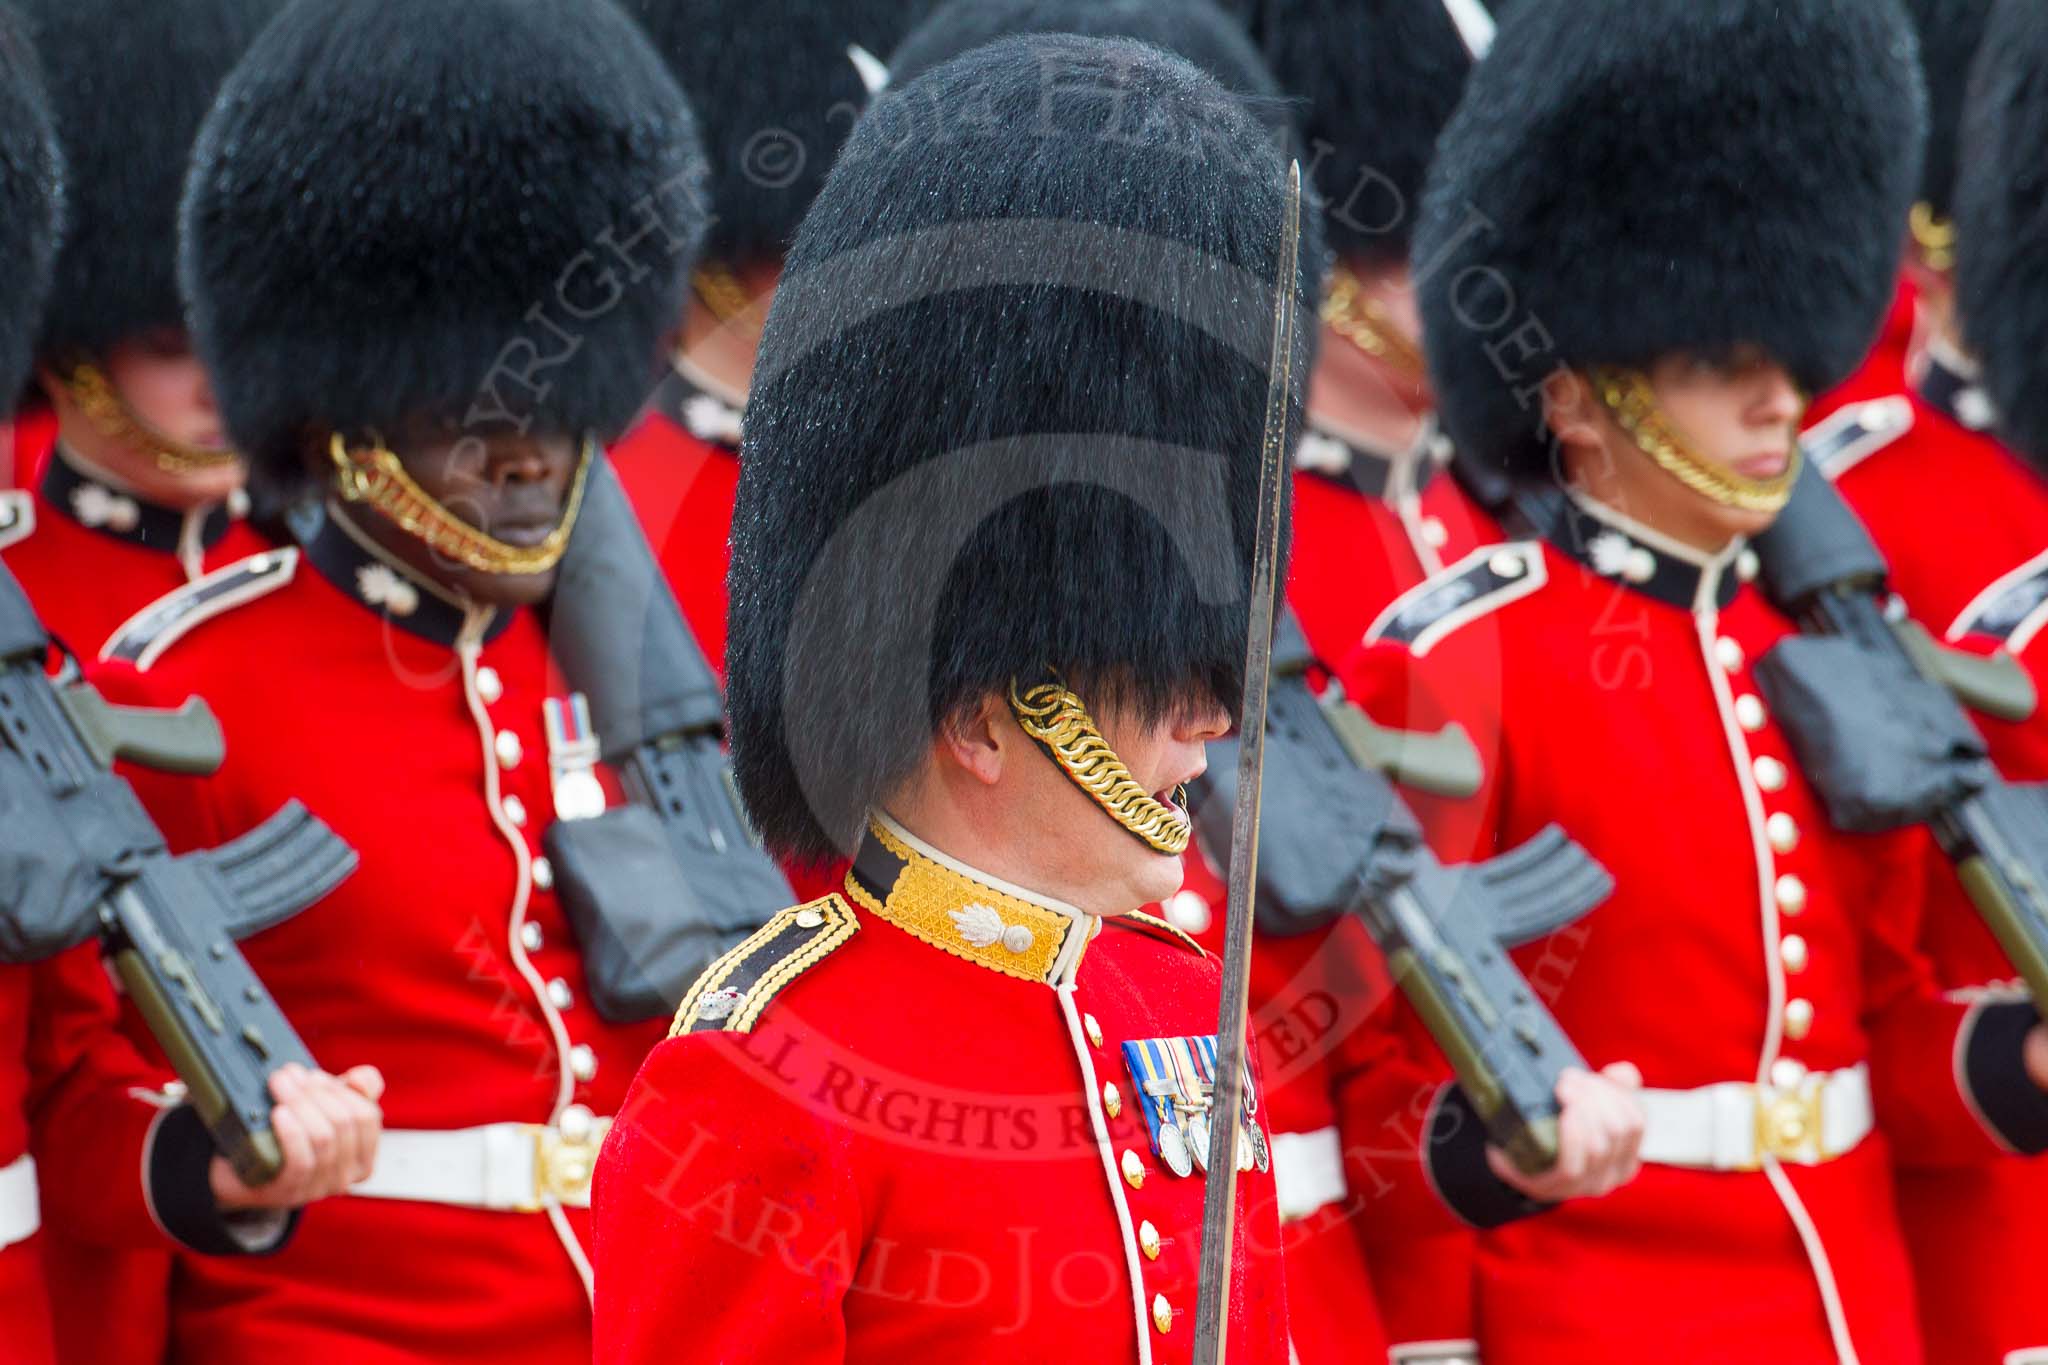 The Colonel's Review 2014.
Horse Guards Parade, Westminster,
London,

United Kingdom,
on 07 June 2014 at 11:35, image #508